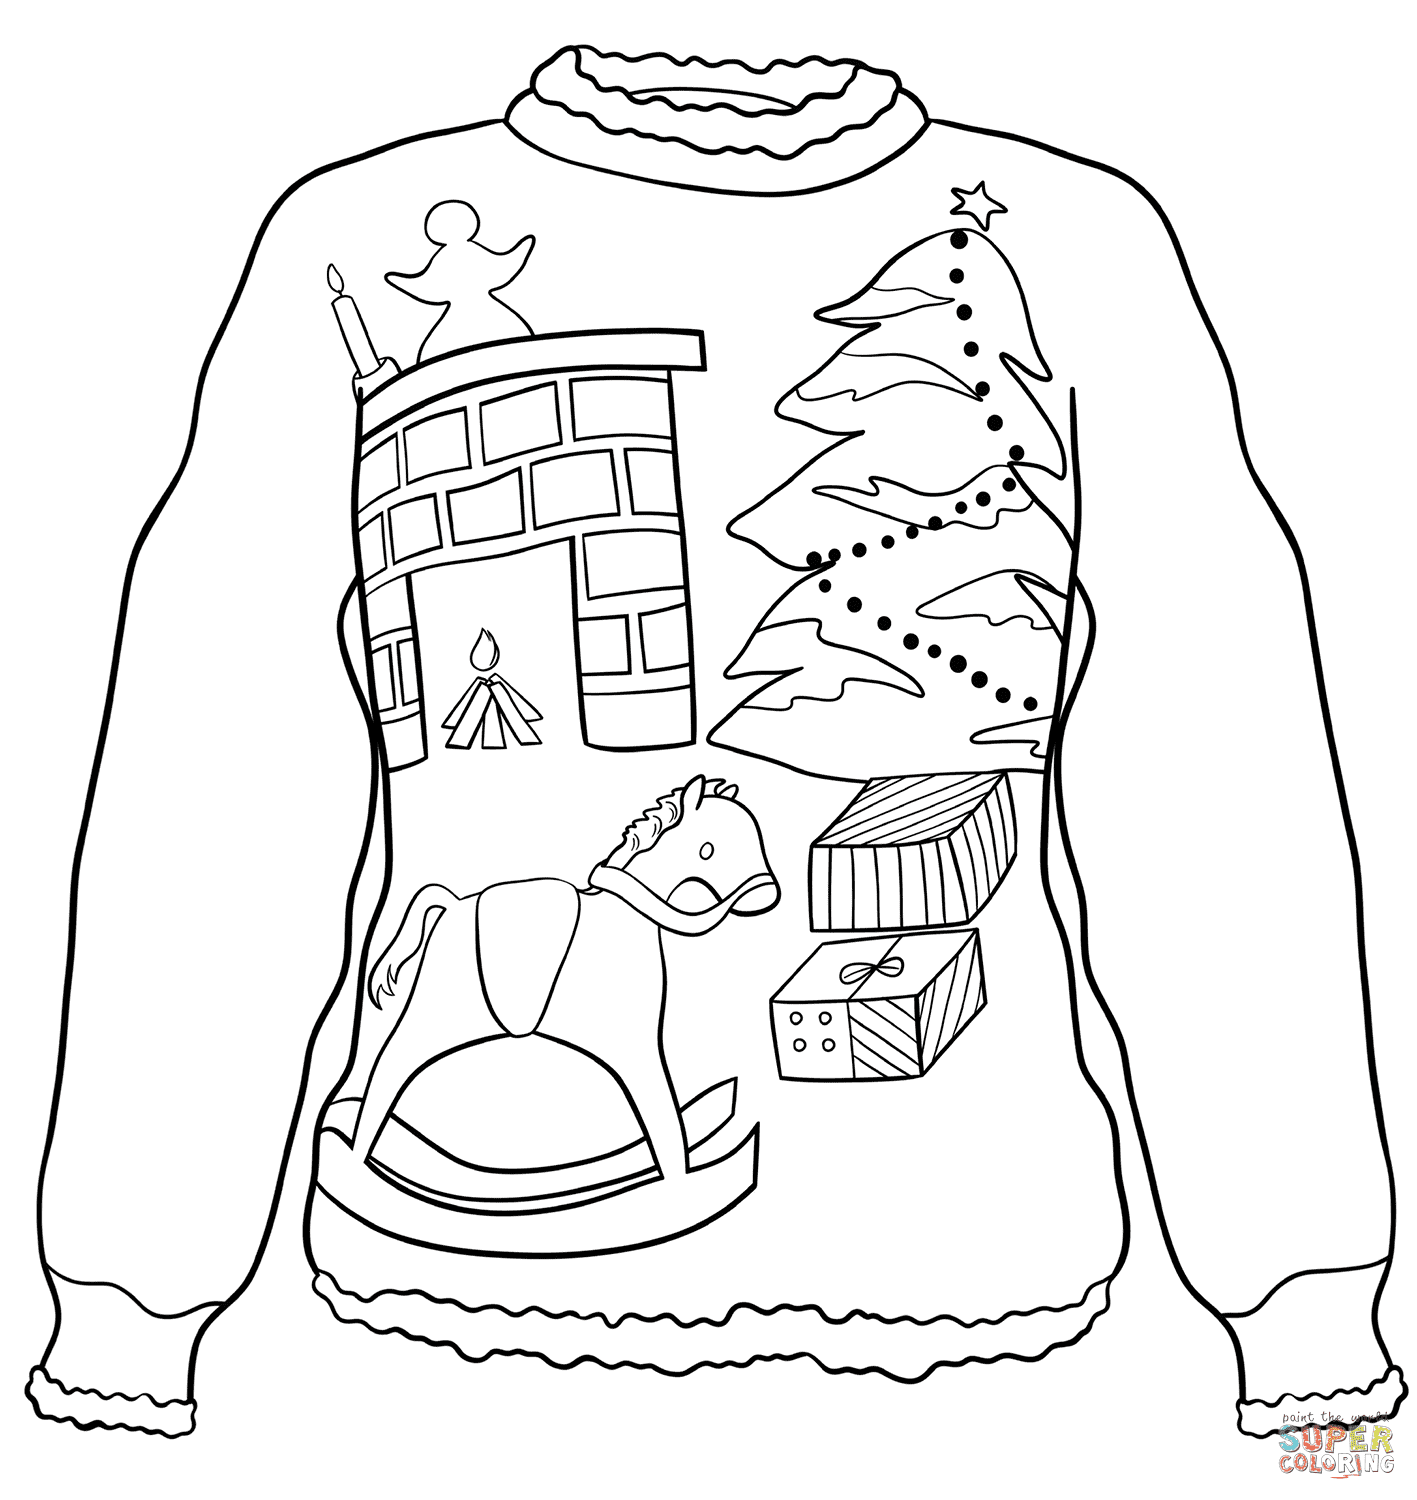 Sweater with Christmas Scene Coloring Page